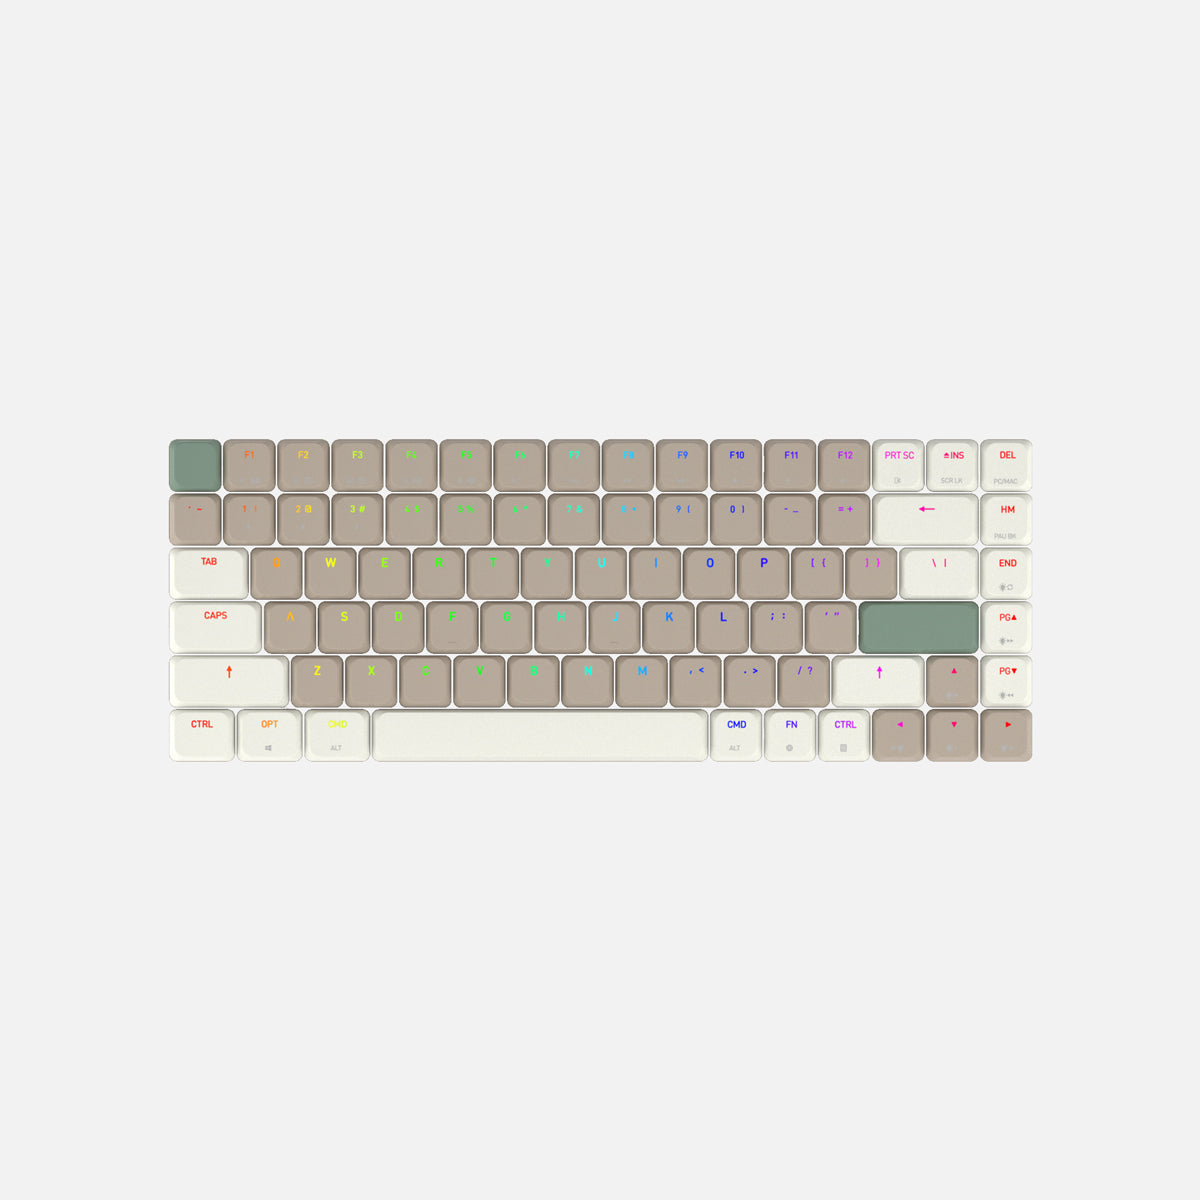 Bosslanke keycaps - 75% lay-out